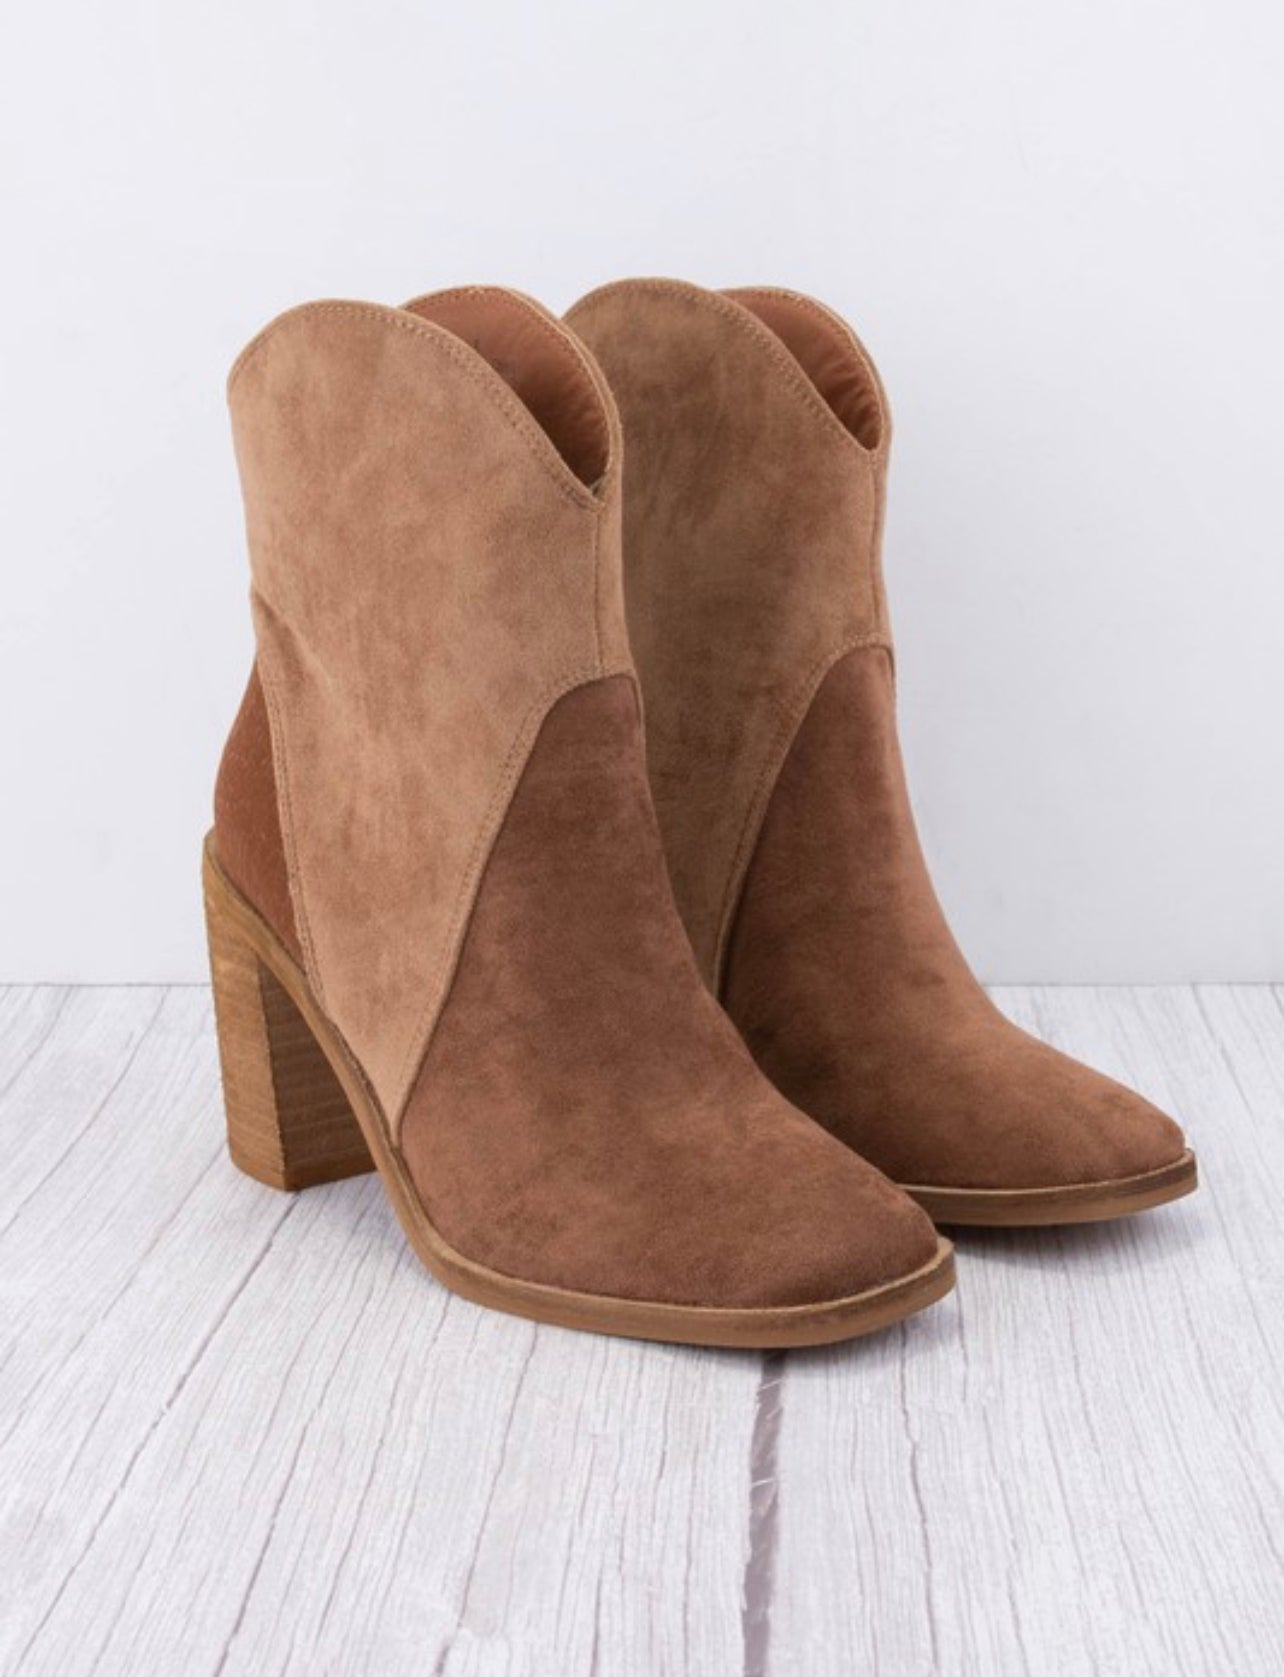 The Kendall Bootie